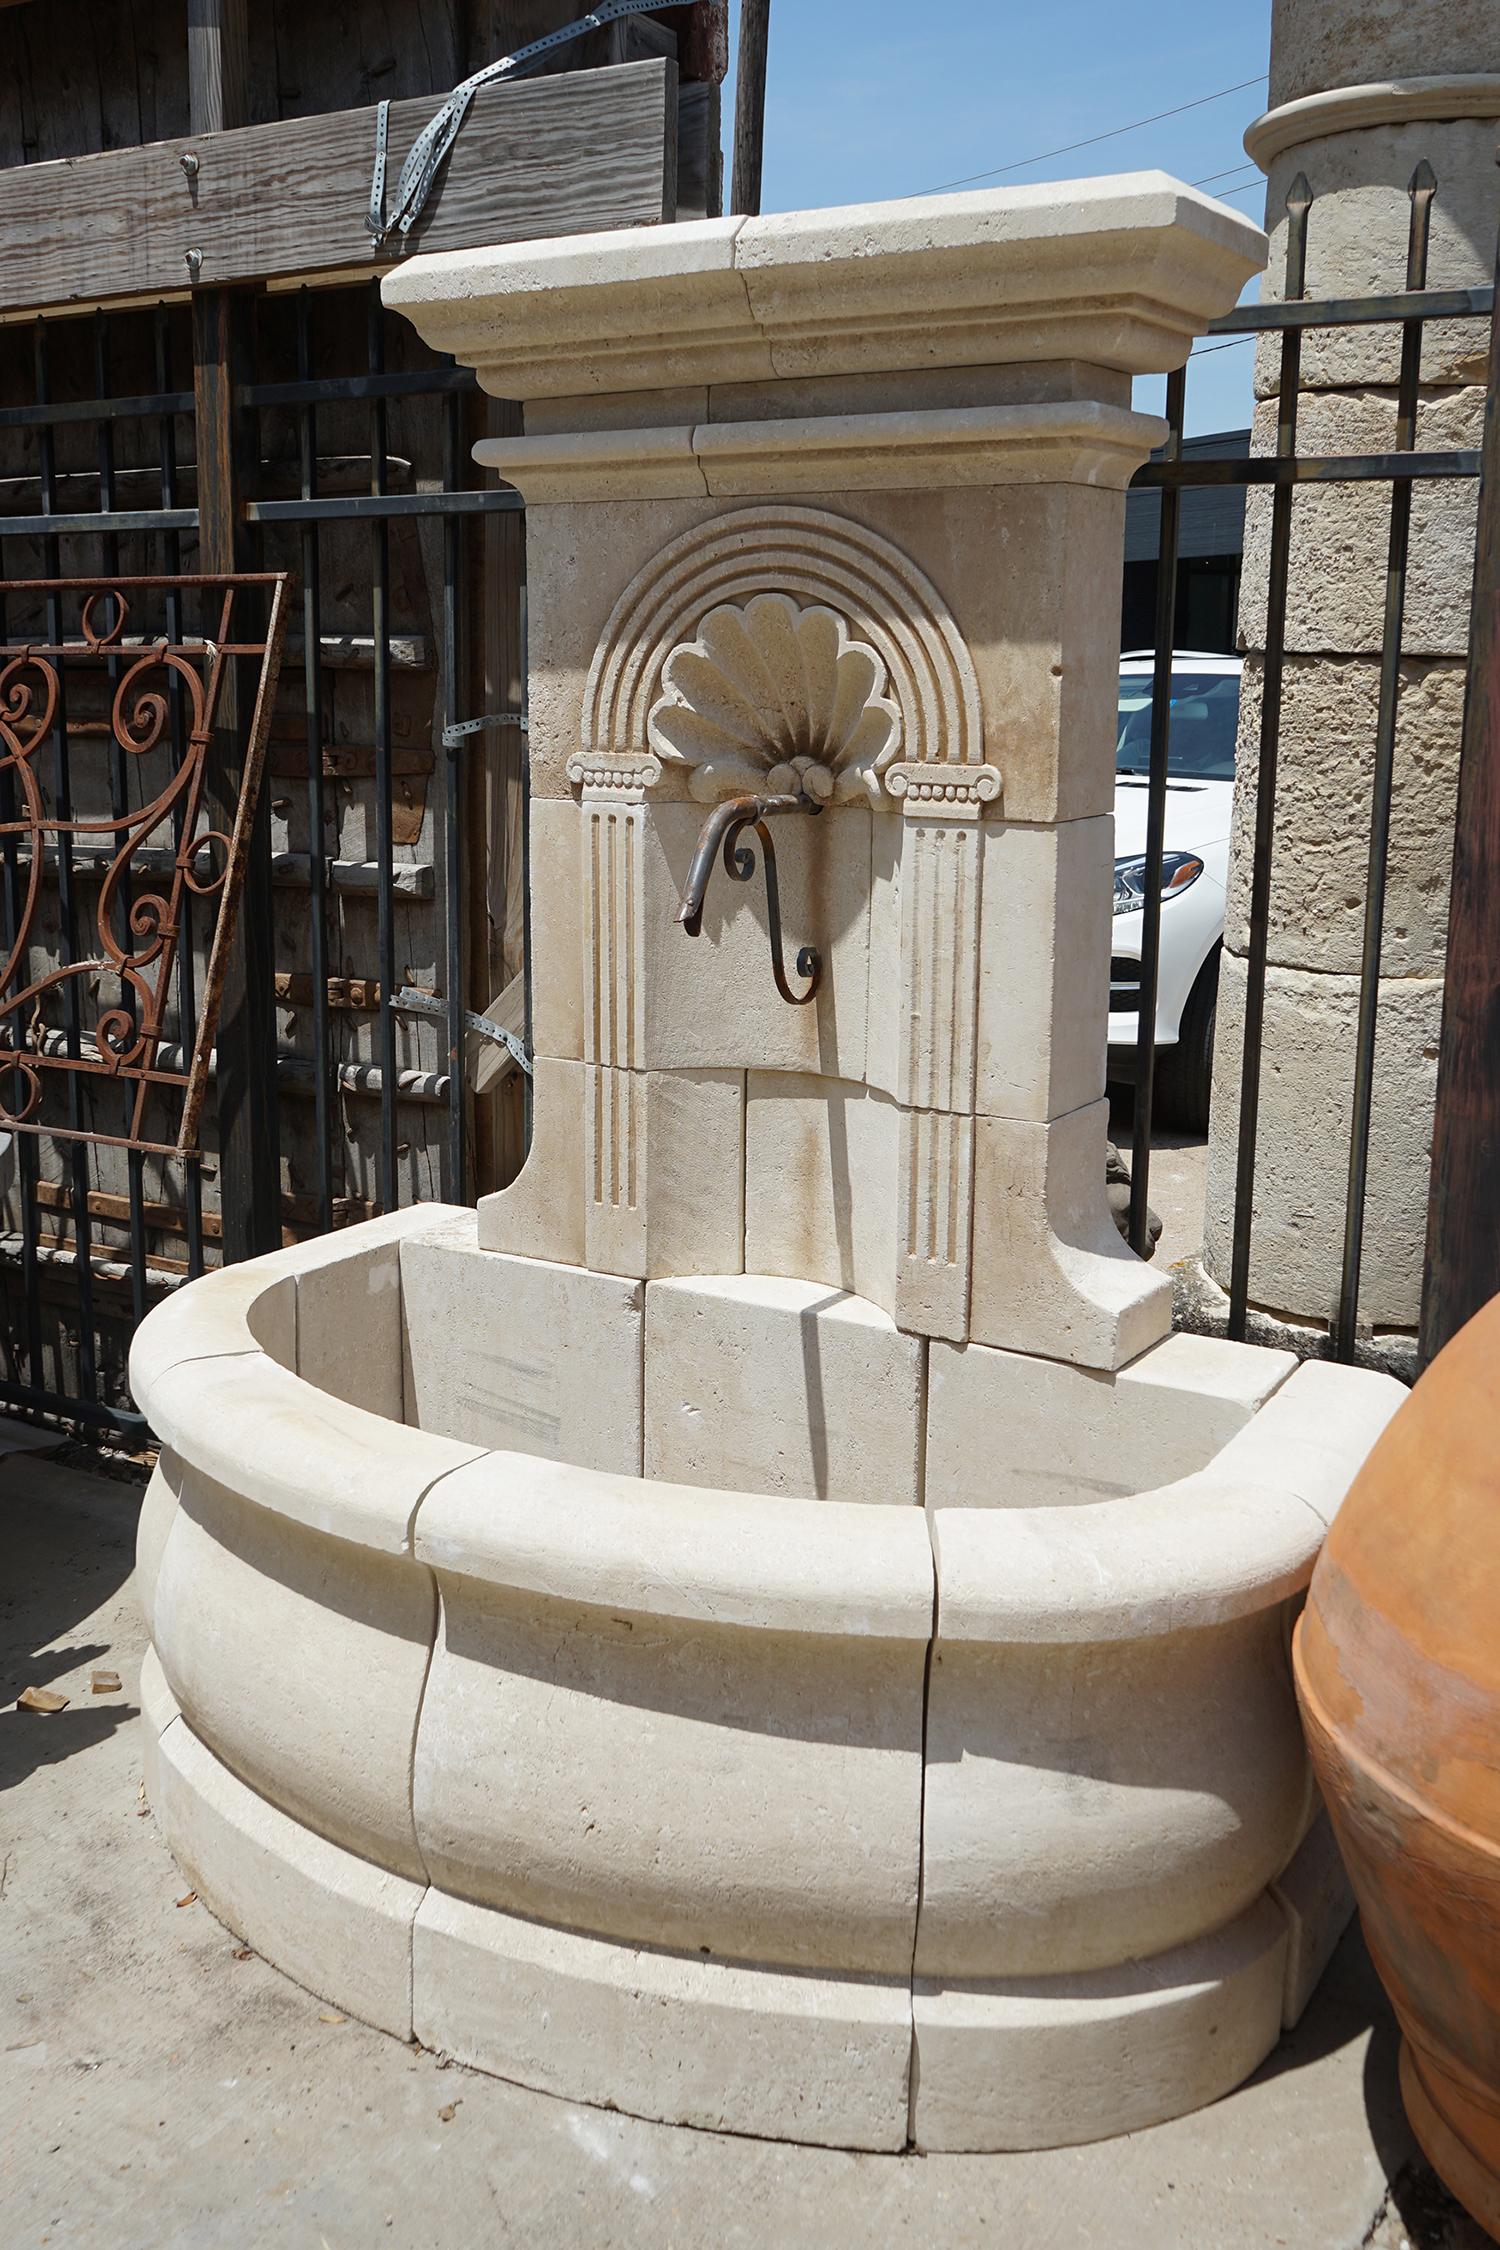 Here we have a hand carved limestone wall fountain from France with a shell design and semi-circular basin.

Origin: France

Measurements: 6'10